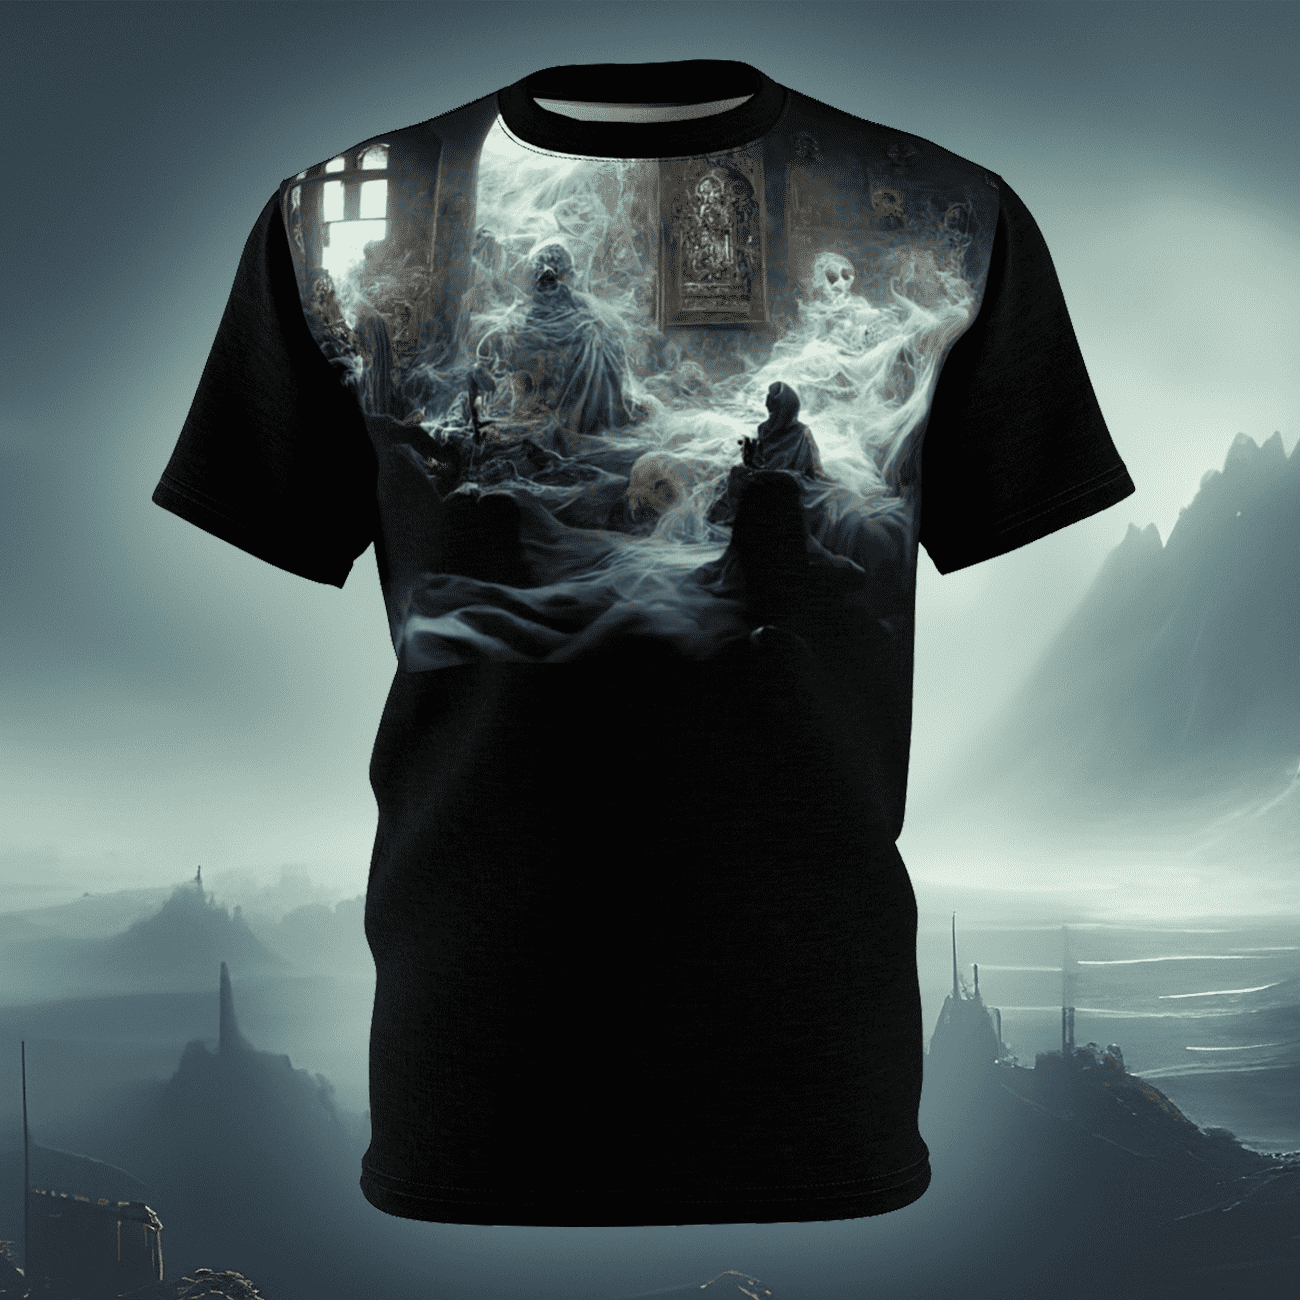 Gothic horror art t-shirt of a creepy haunted scene with ghosts in the fog. 